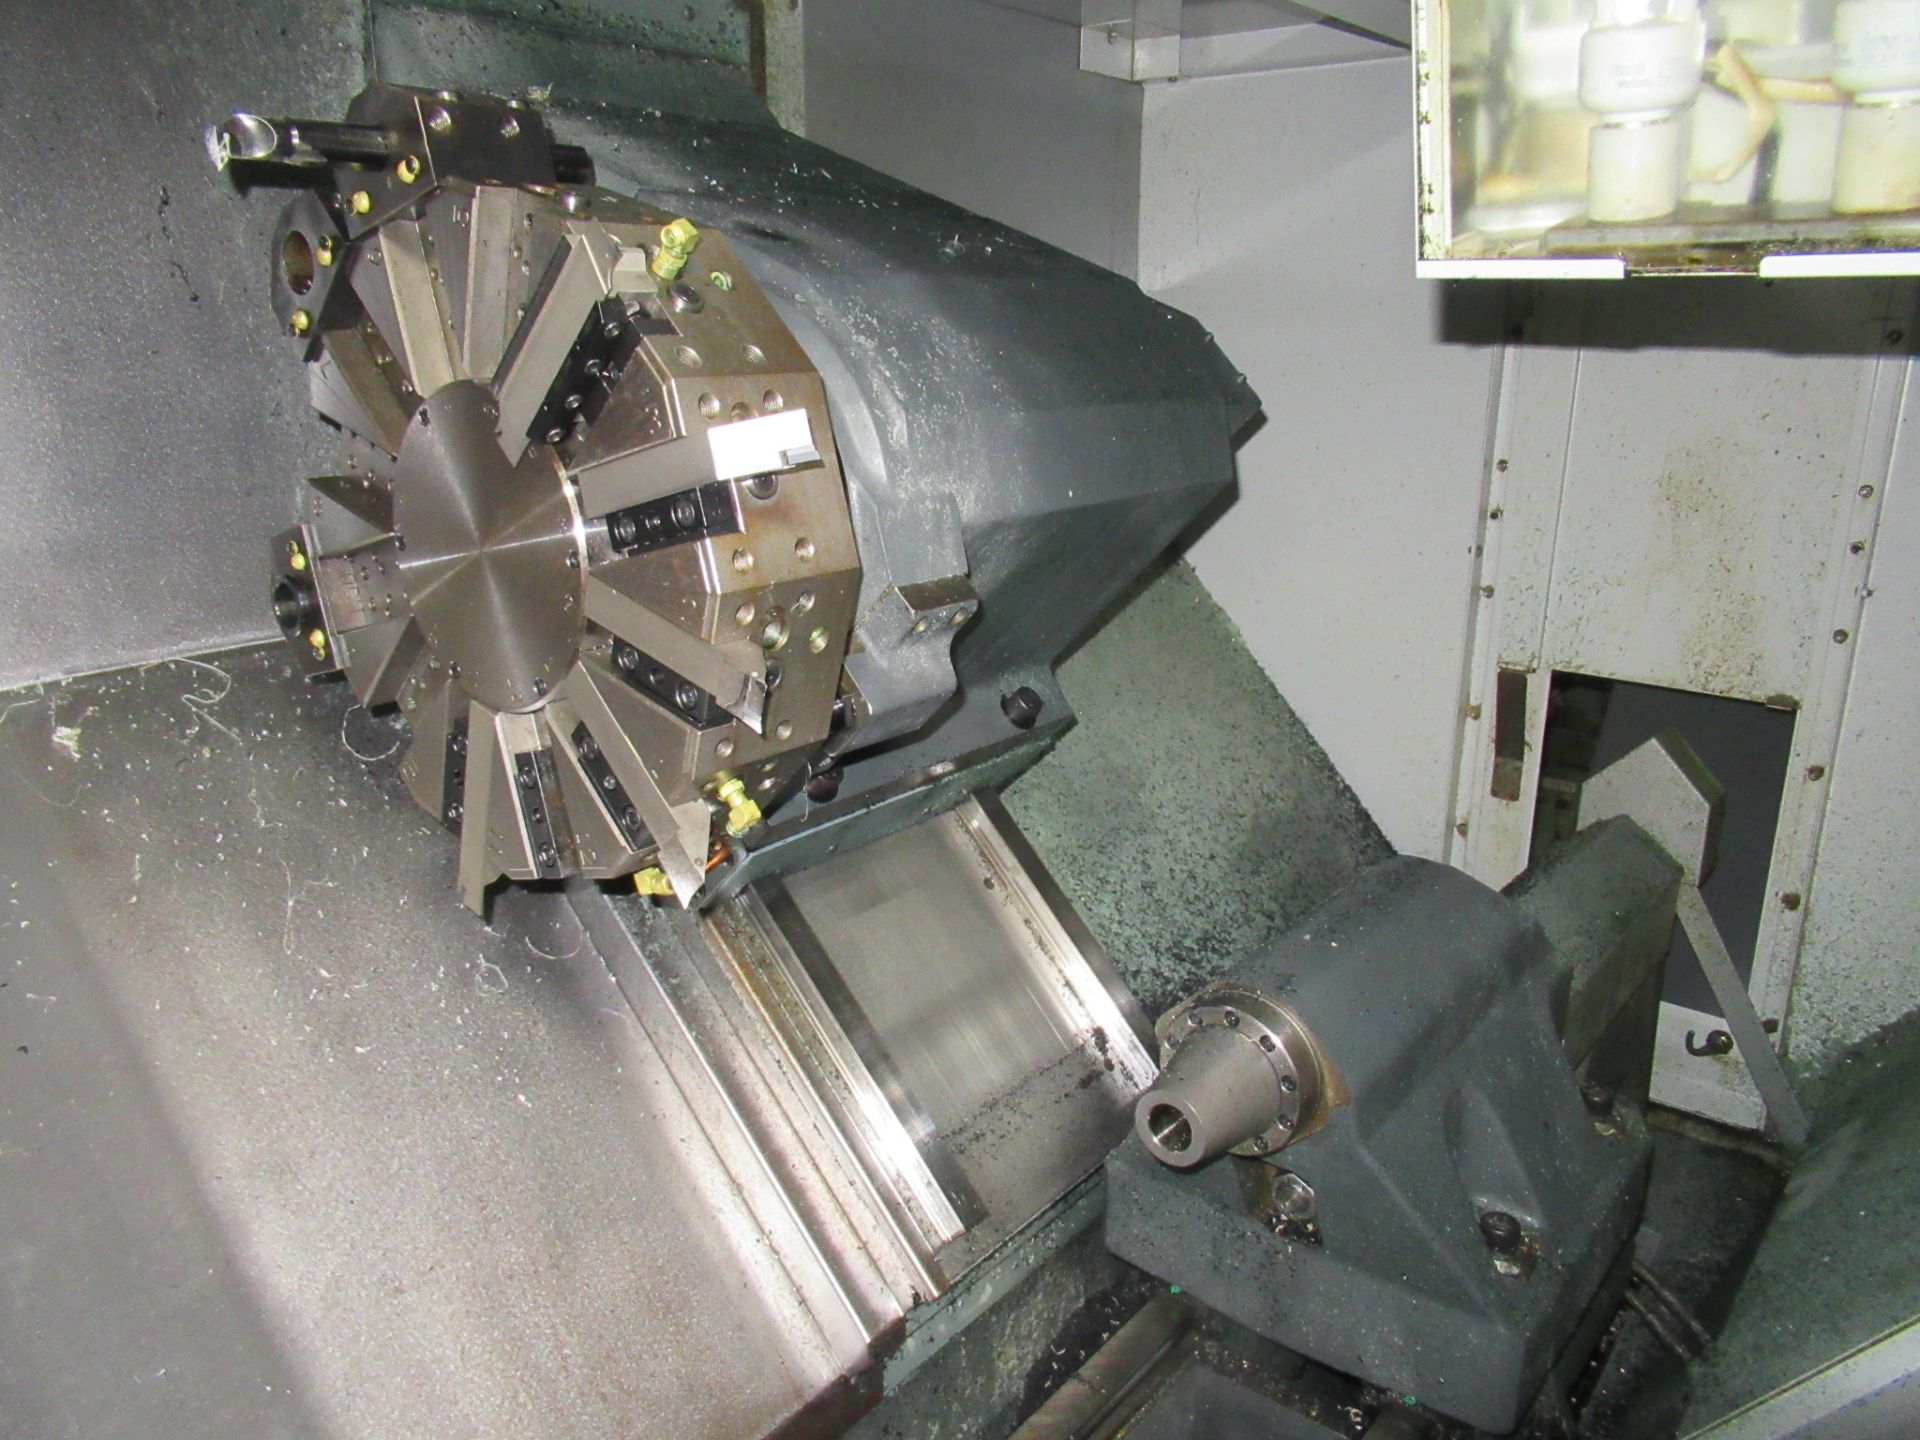 CNC LATHE, HAAS MDL. ST-30, new 2011, Haas CNC control, 31.75" max. swing, 21" max. cutting dia., - Image 6 of 7